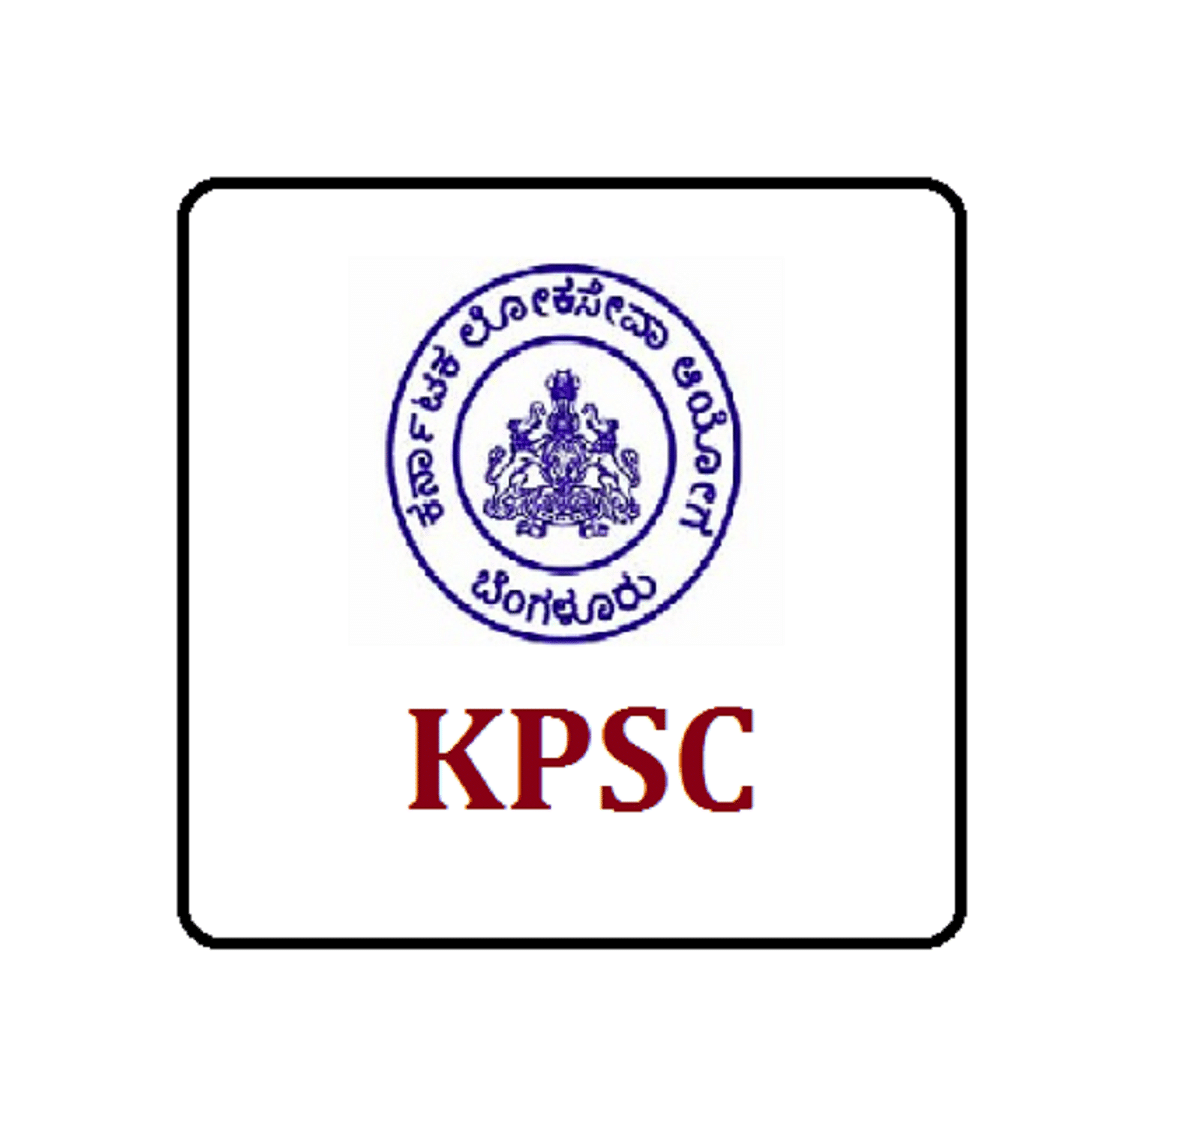 KPSC FDA 2021 Admit Card Released, Steps to Download Here